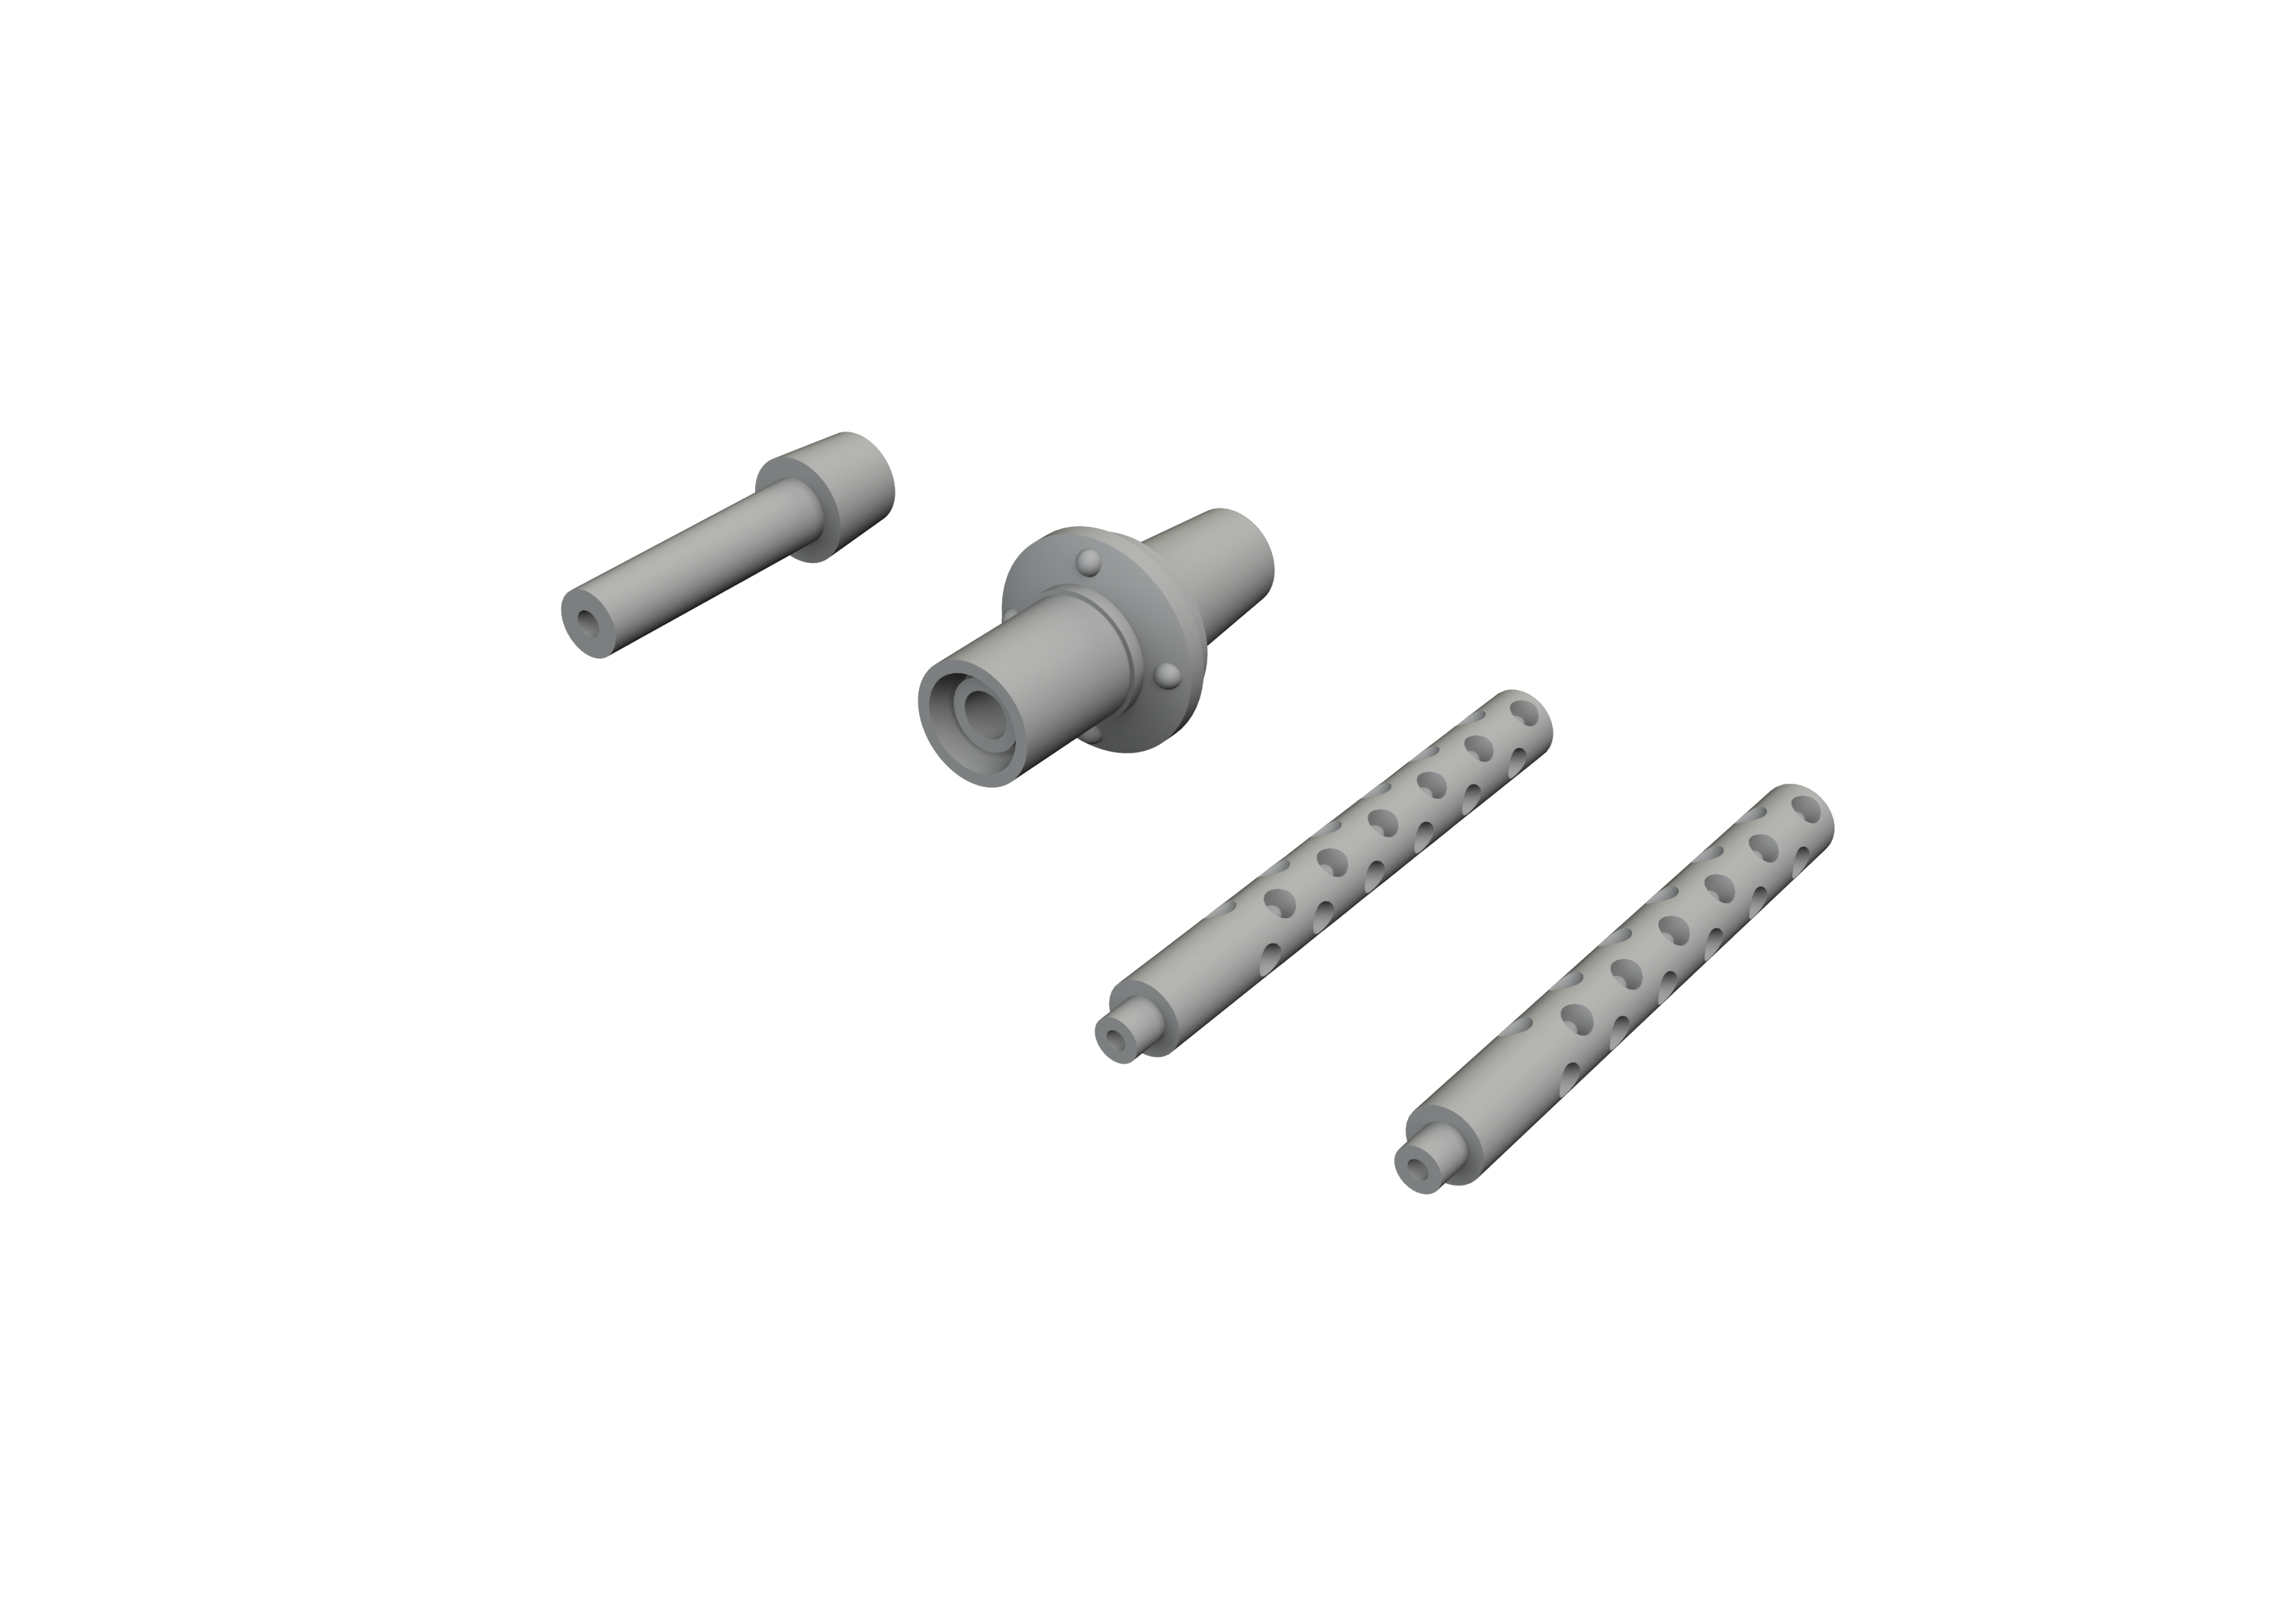 Additions (3D resin printing) 1/72 Bell P-39Q Airacobra gun barrels 3D-Printed (designed to be used with Arma Hobby kits) 